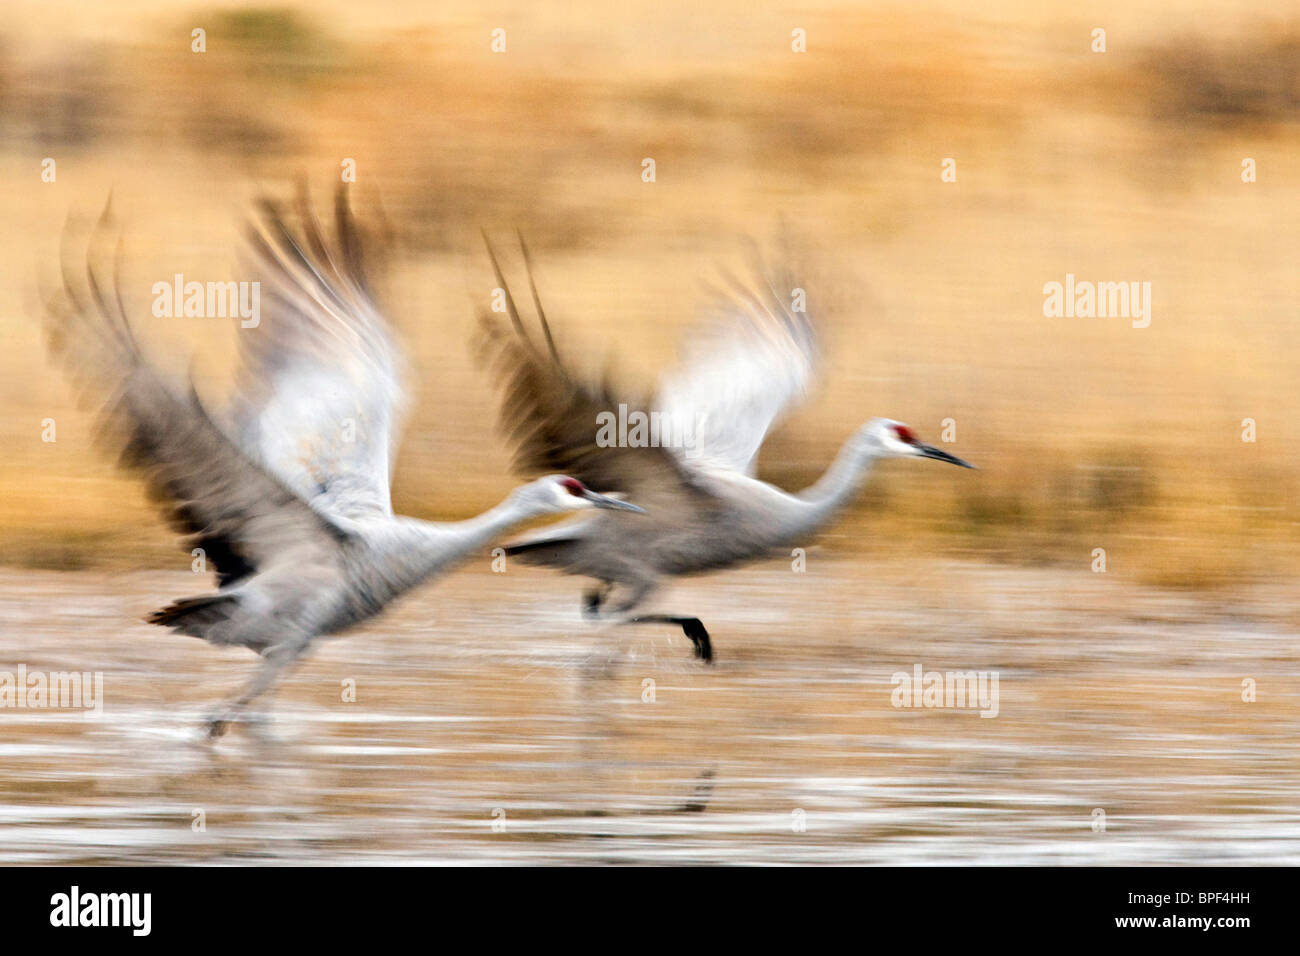 Sandhill Cranes in a running takeoff  Bosque del Apache National Wildlife Refuge on the Rio Grande in central New Mexico, winter Stock Photo